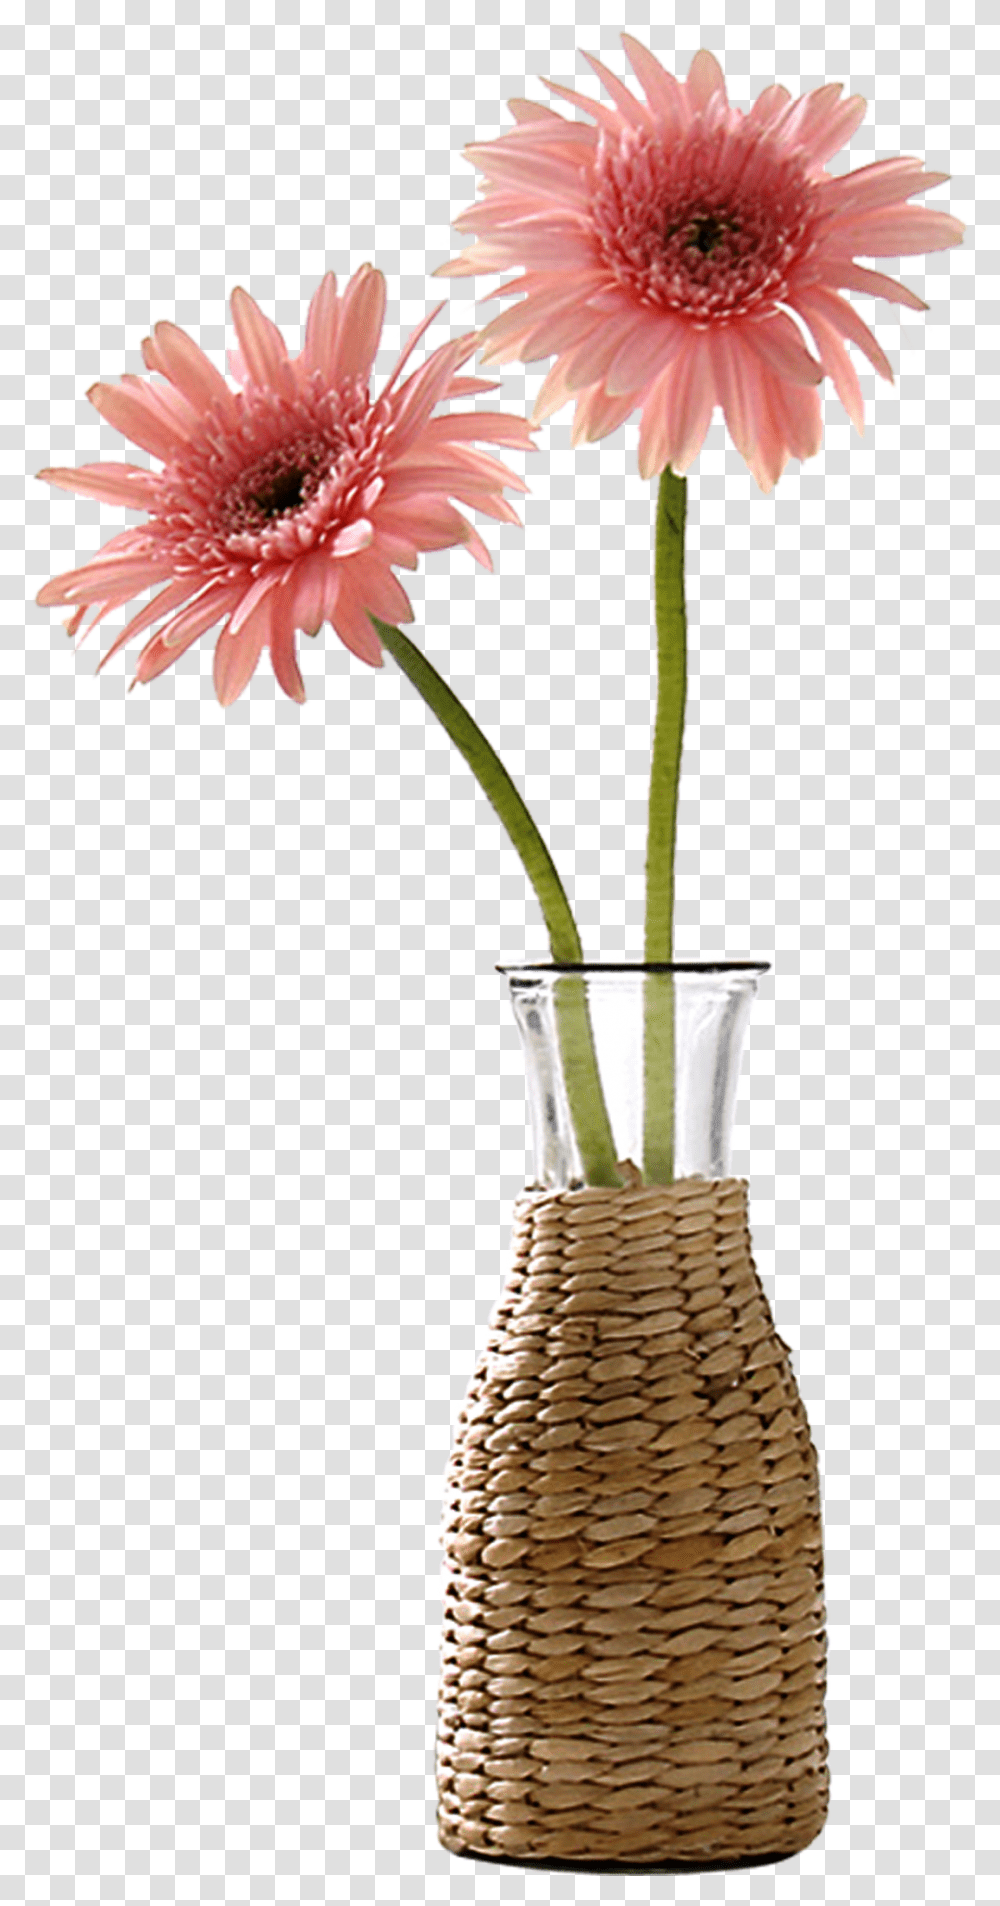 Download Beautiful Vase Flower Decoration Vector Vase Vase With A Flower, Plant, Blossom, Daisy, Daisies Transparent Png